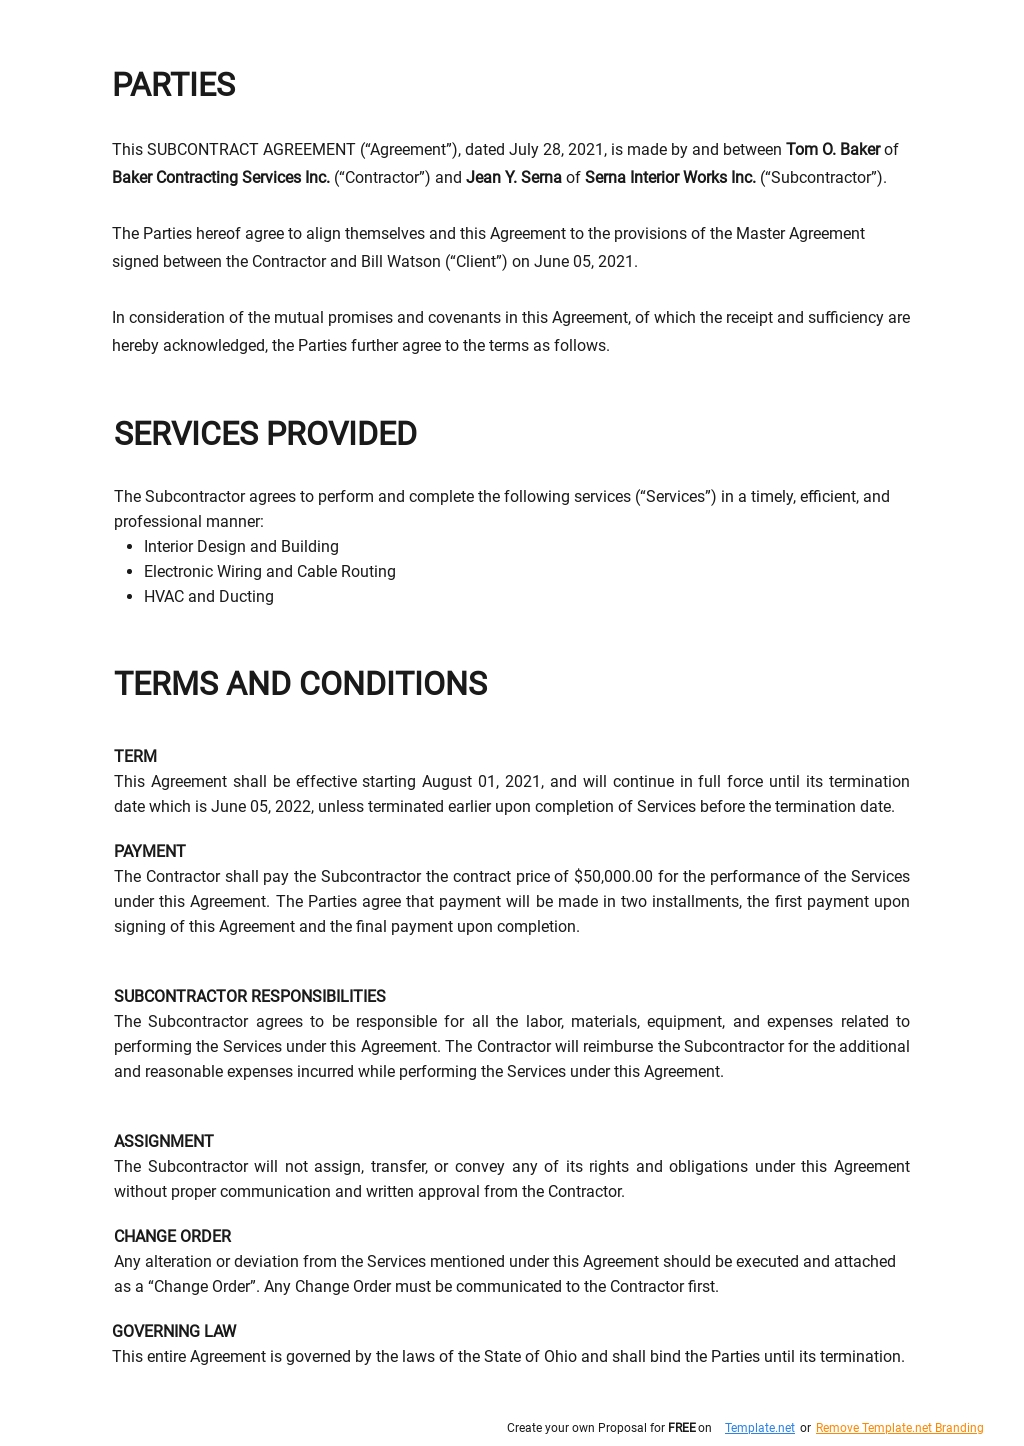 Sample Subcontract Agreement Template 1.jpe